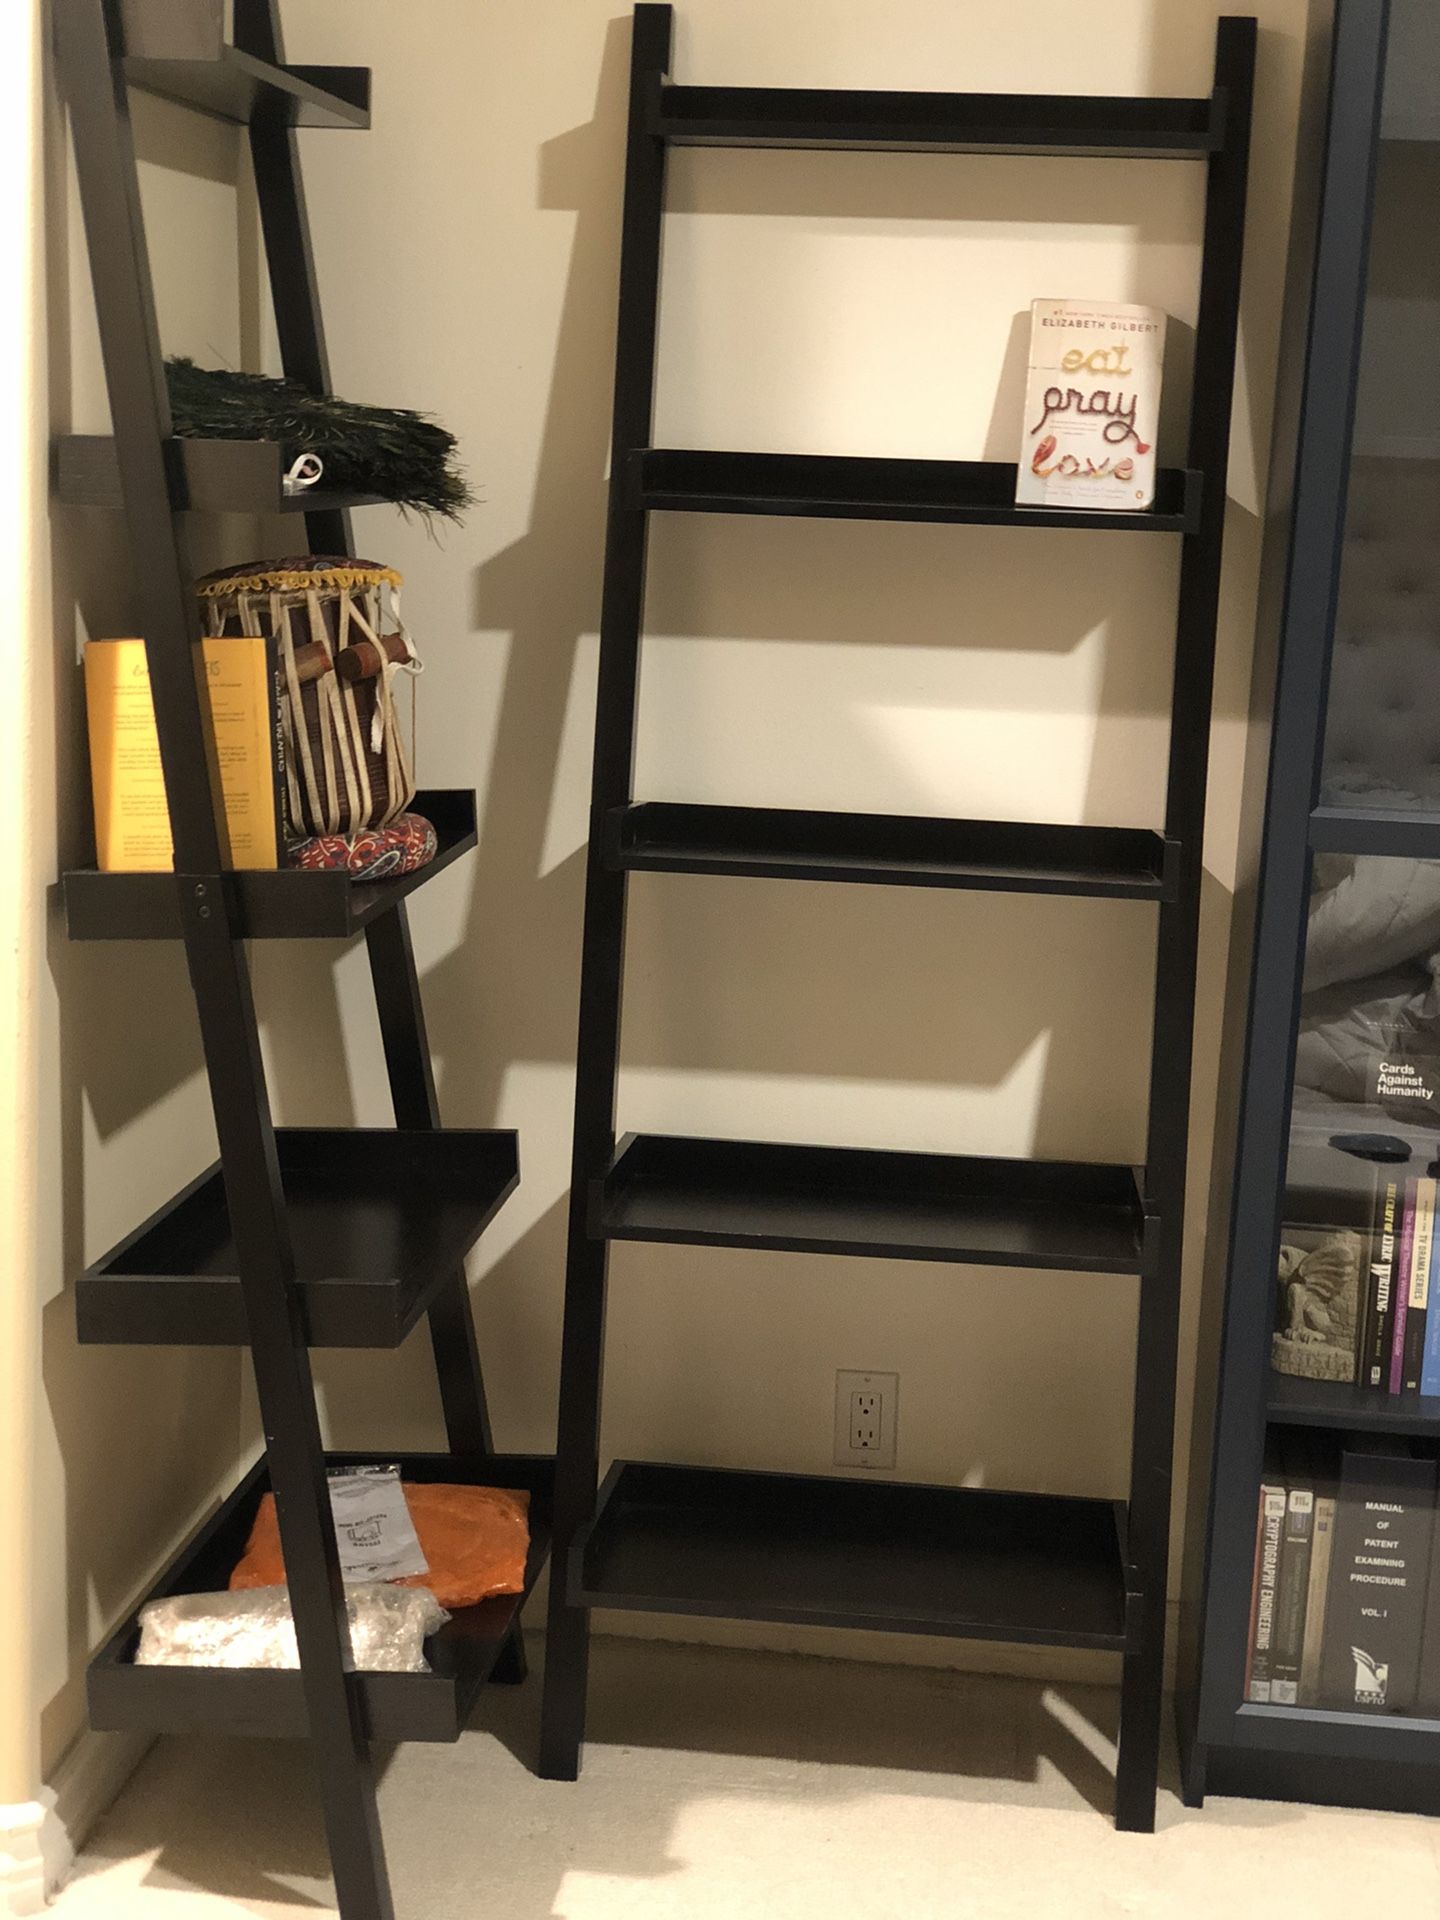 Container Store leaning black bookshelves (set of 2)